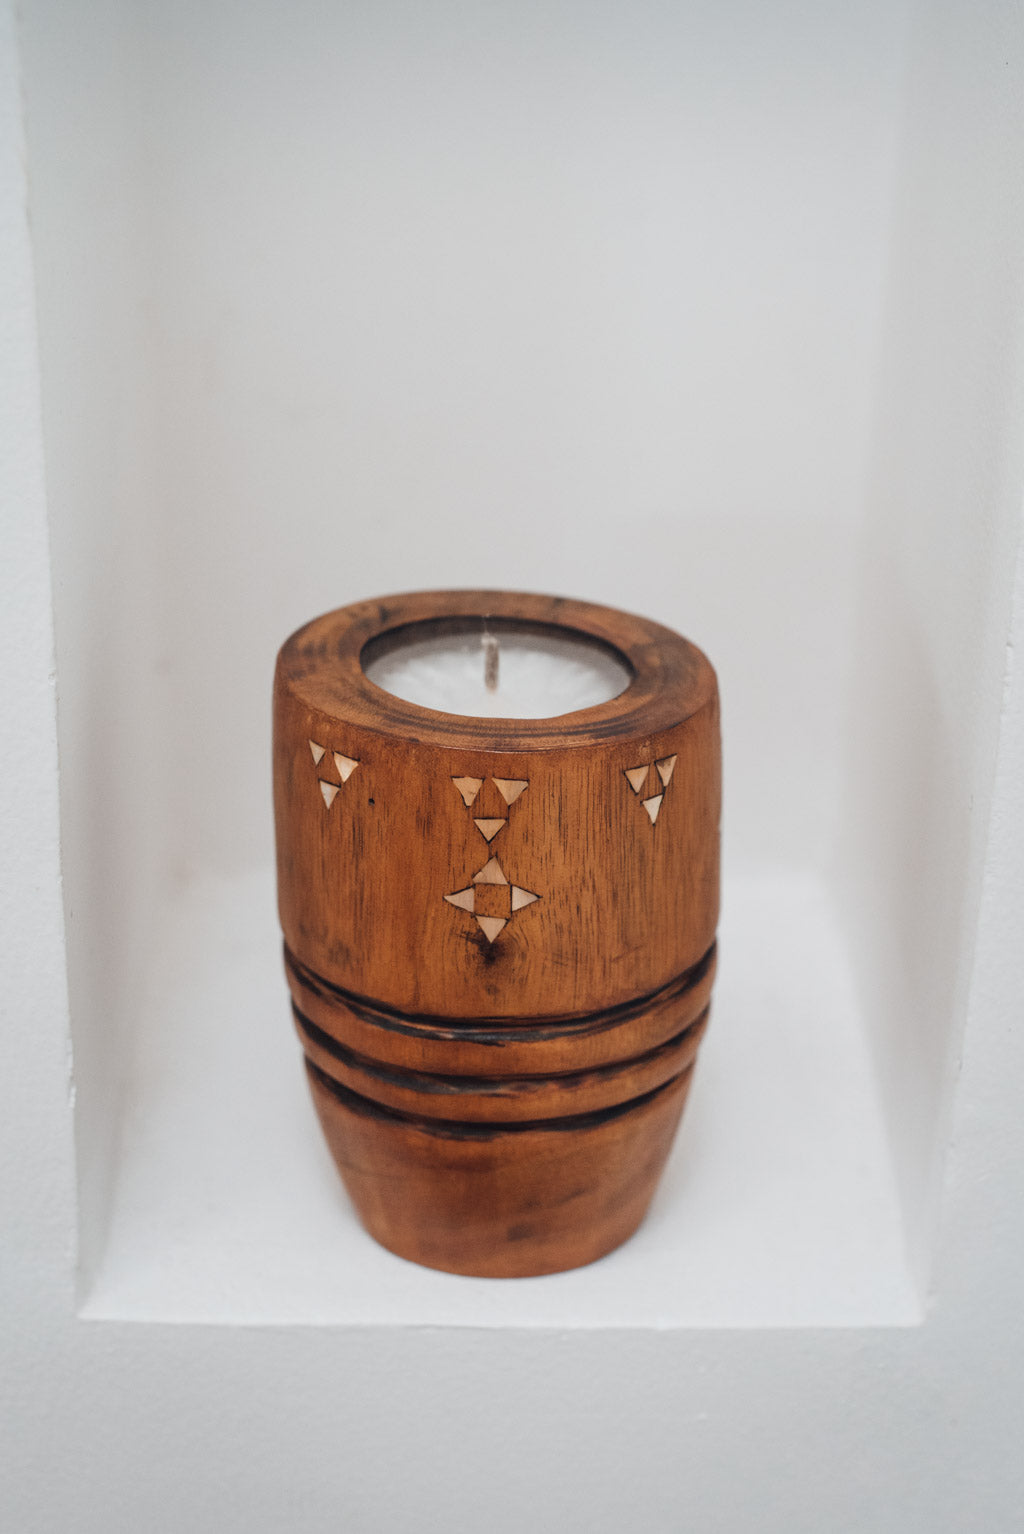 Frangipani candle in wood inlaid with mother-of-pearl